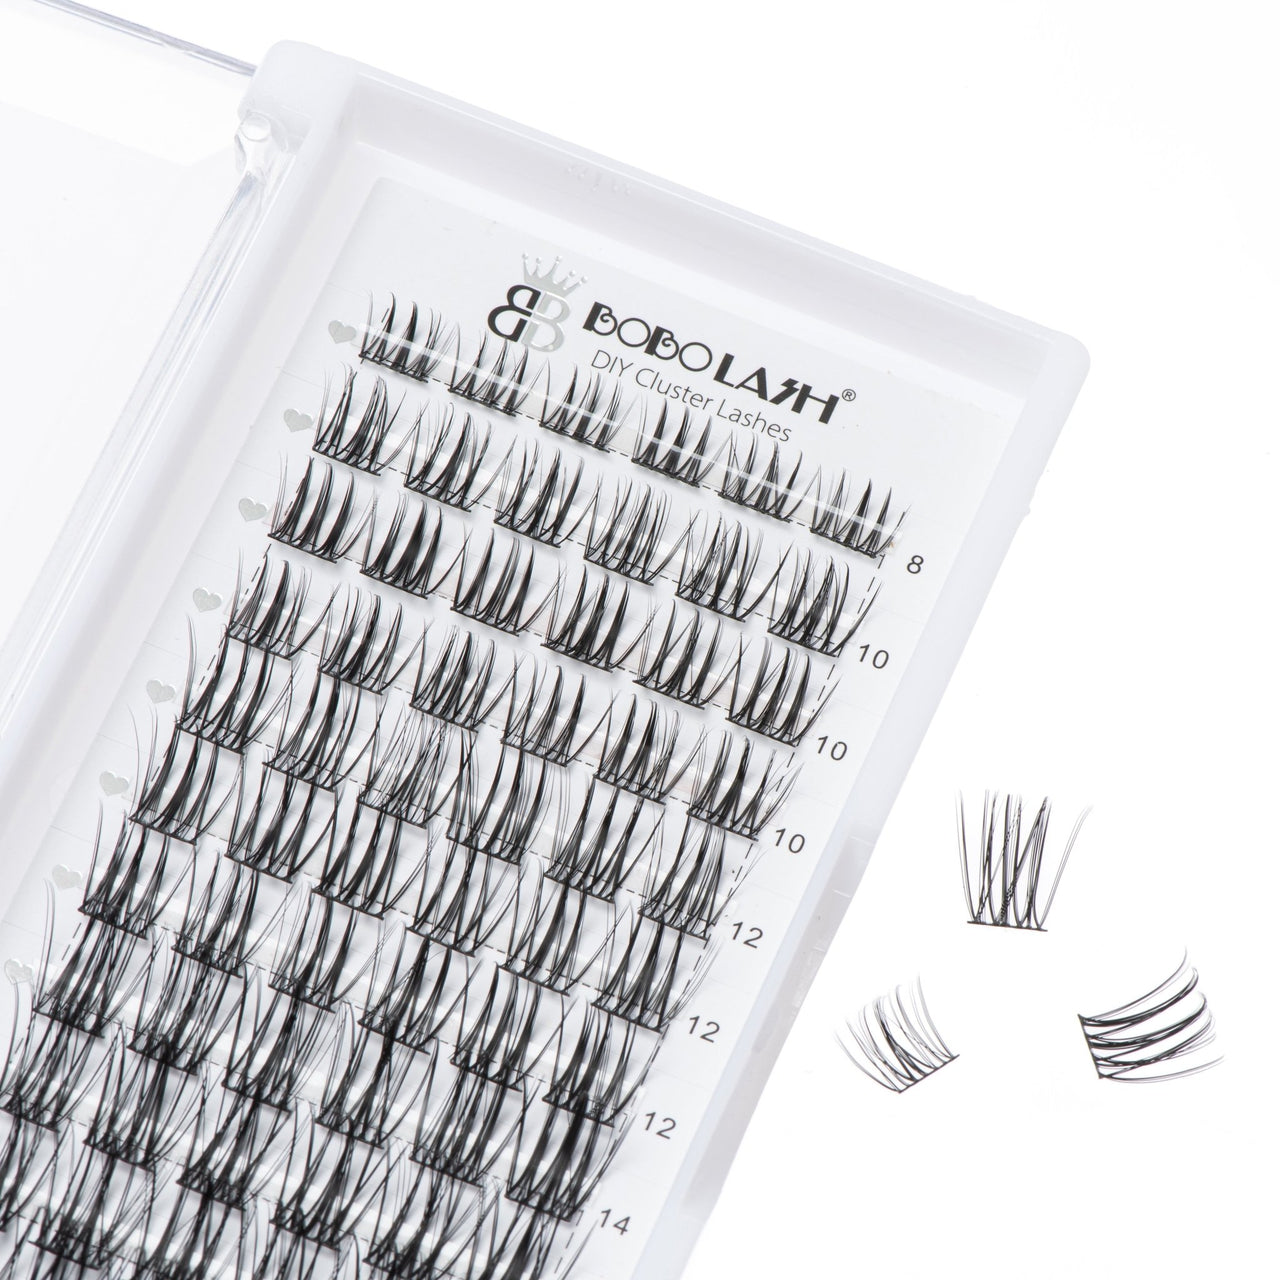 A09 Lash Clusters DIY Eyelash Extensions 72 Clusters Lashes